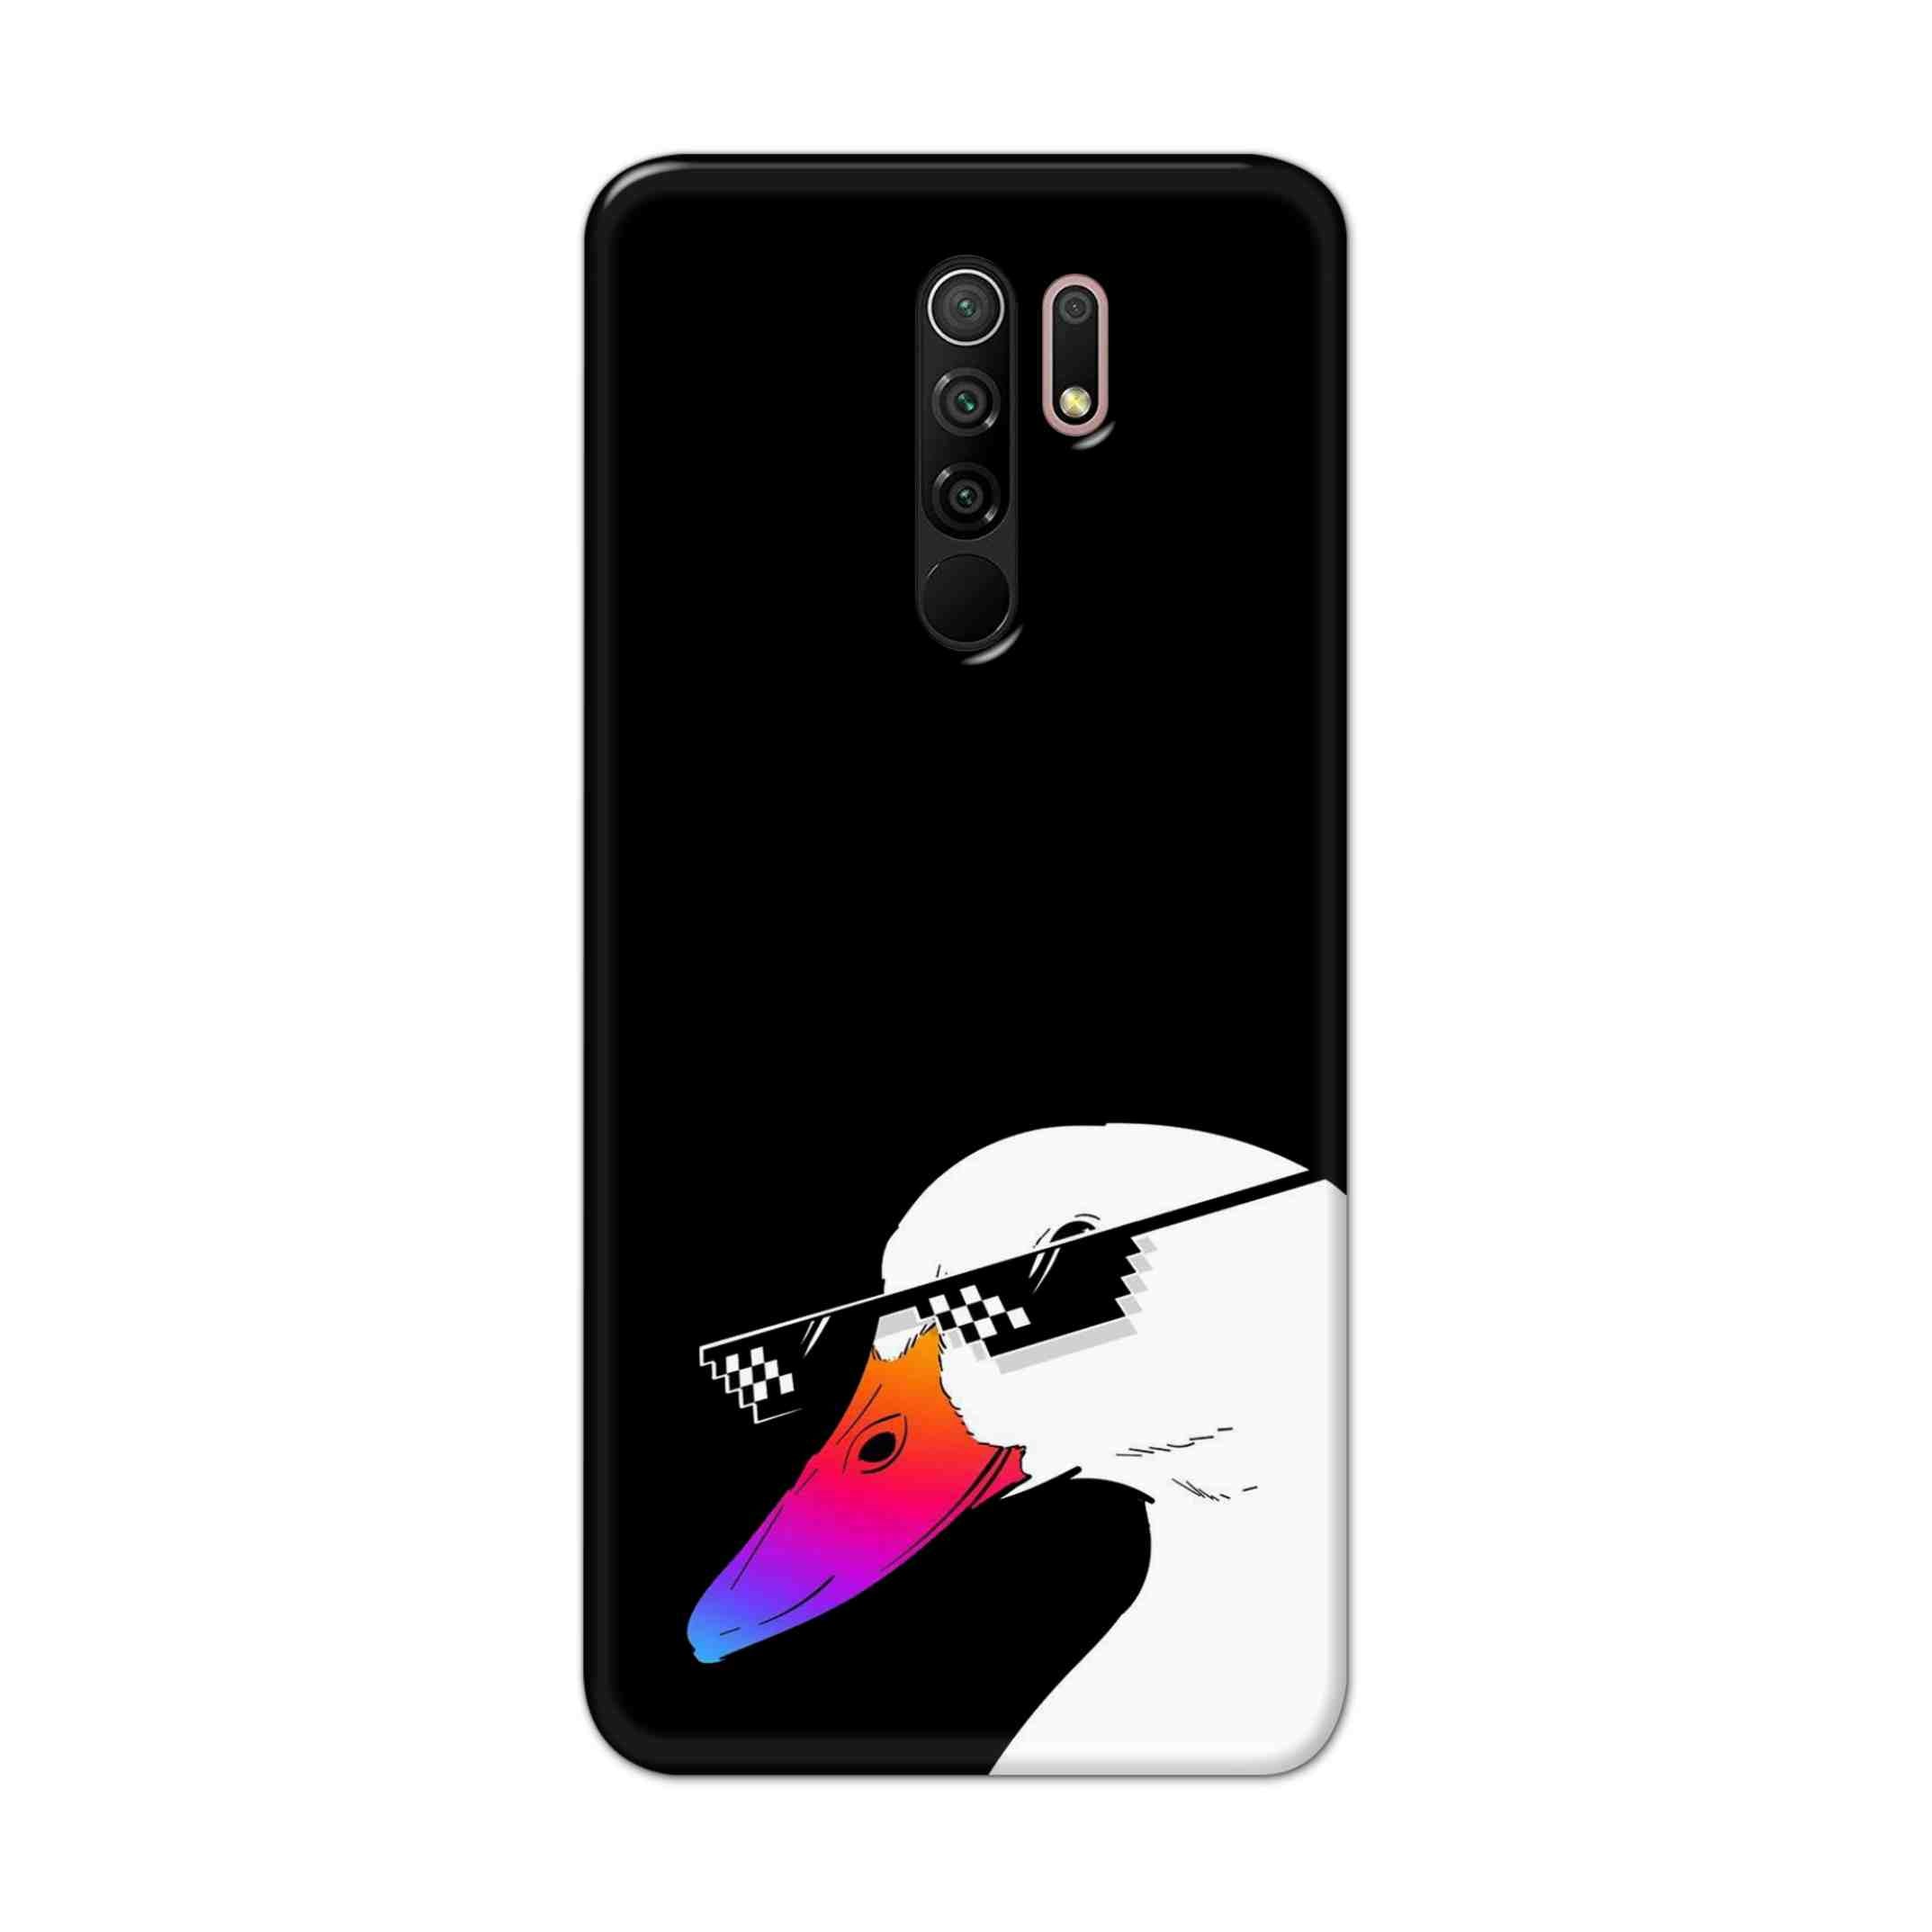 Buy Neon Duck Hard Back Mobile Phone Case Cover For Xiaomi Redmi 9 Prime Online